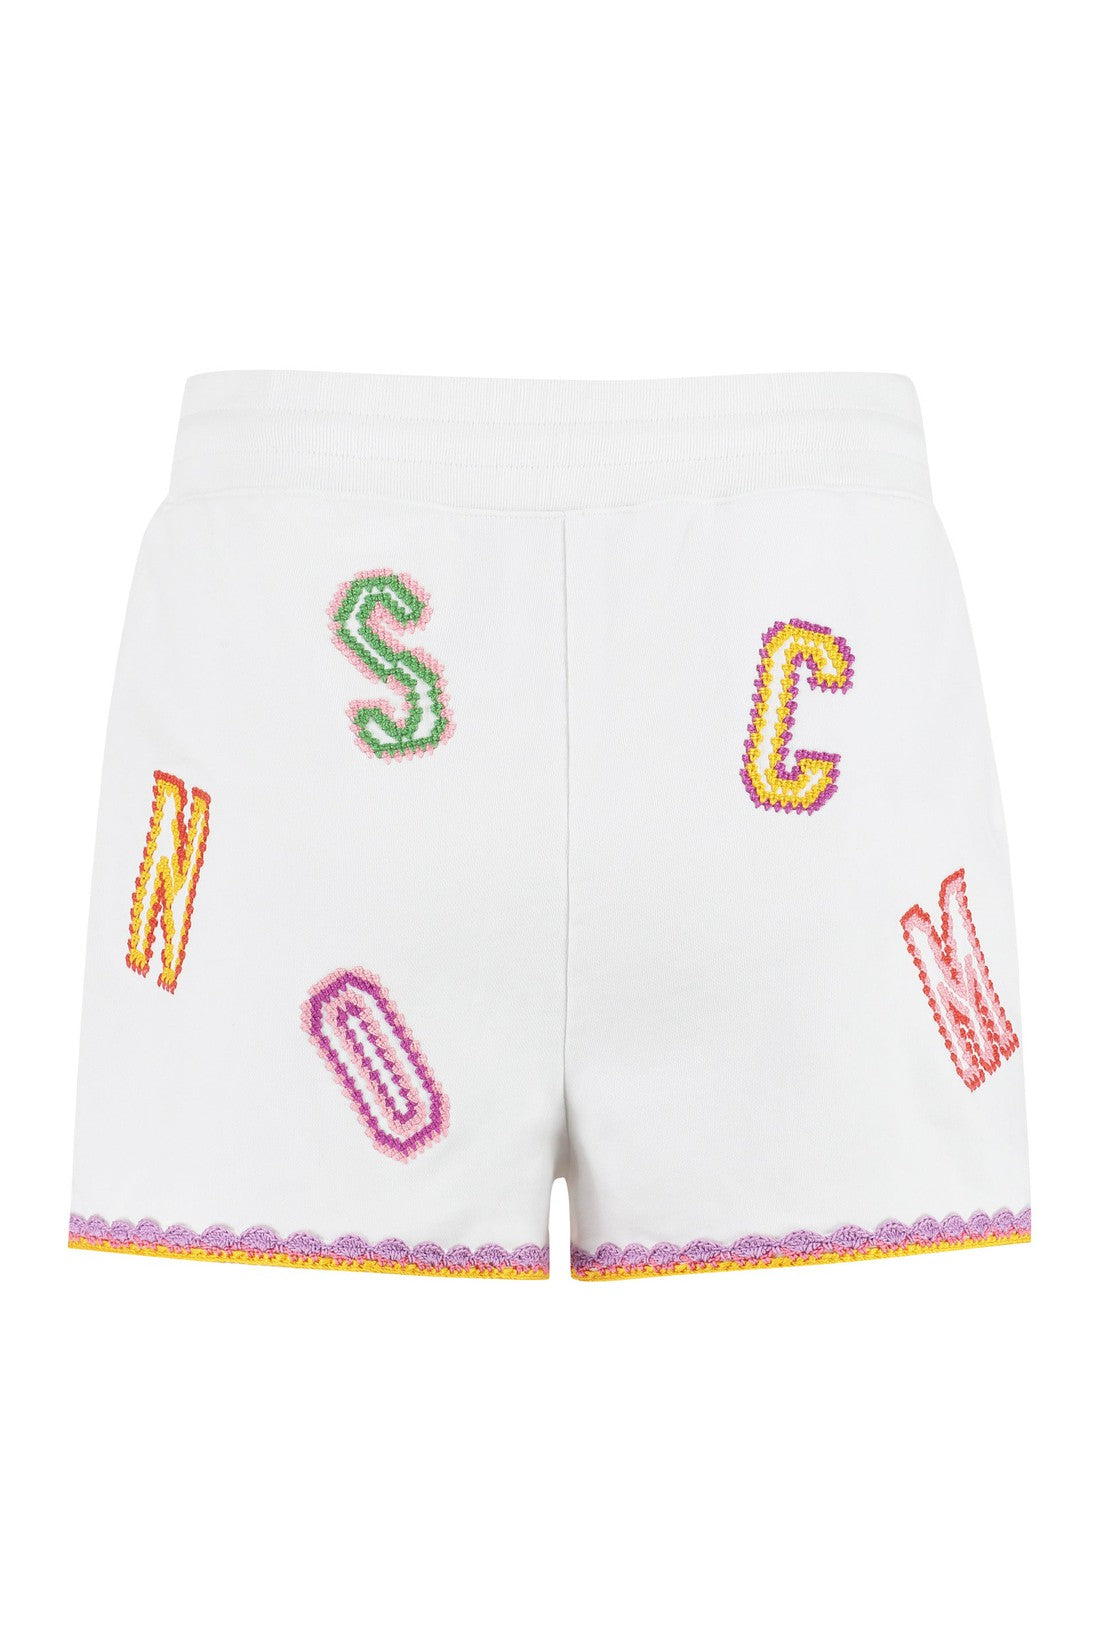 Moschino-OUTLET-SALE-Embroidered sweatshorts-ARCHIVIST